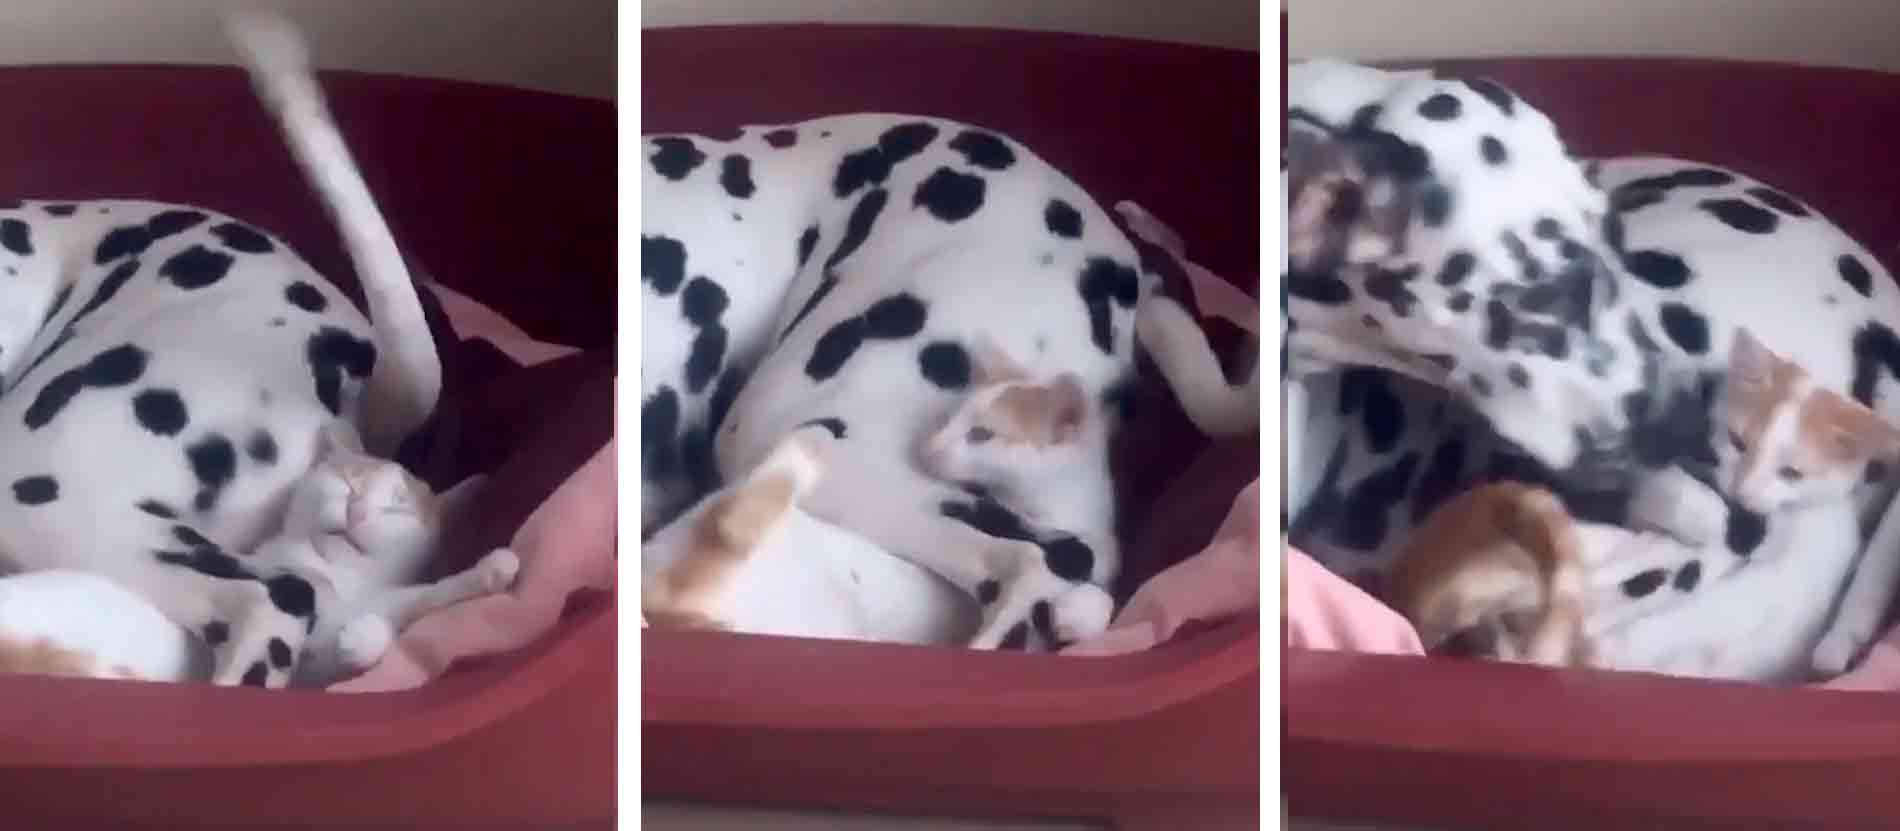 Hilarious video: with its tail, the Dalmatian dog doesn't leave the kitten in peace (Photo: Reproduction/Reddit)